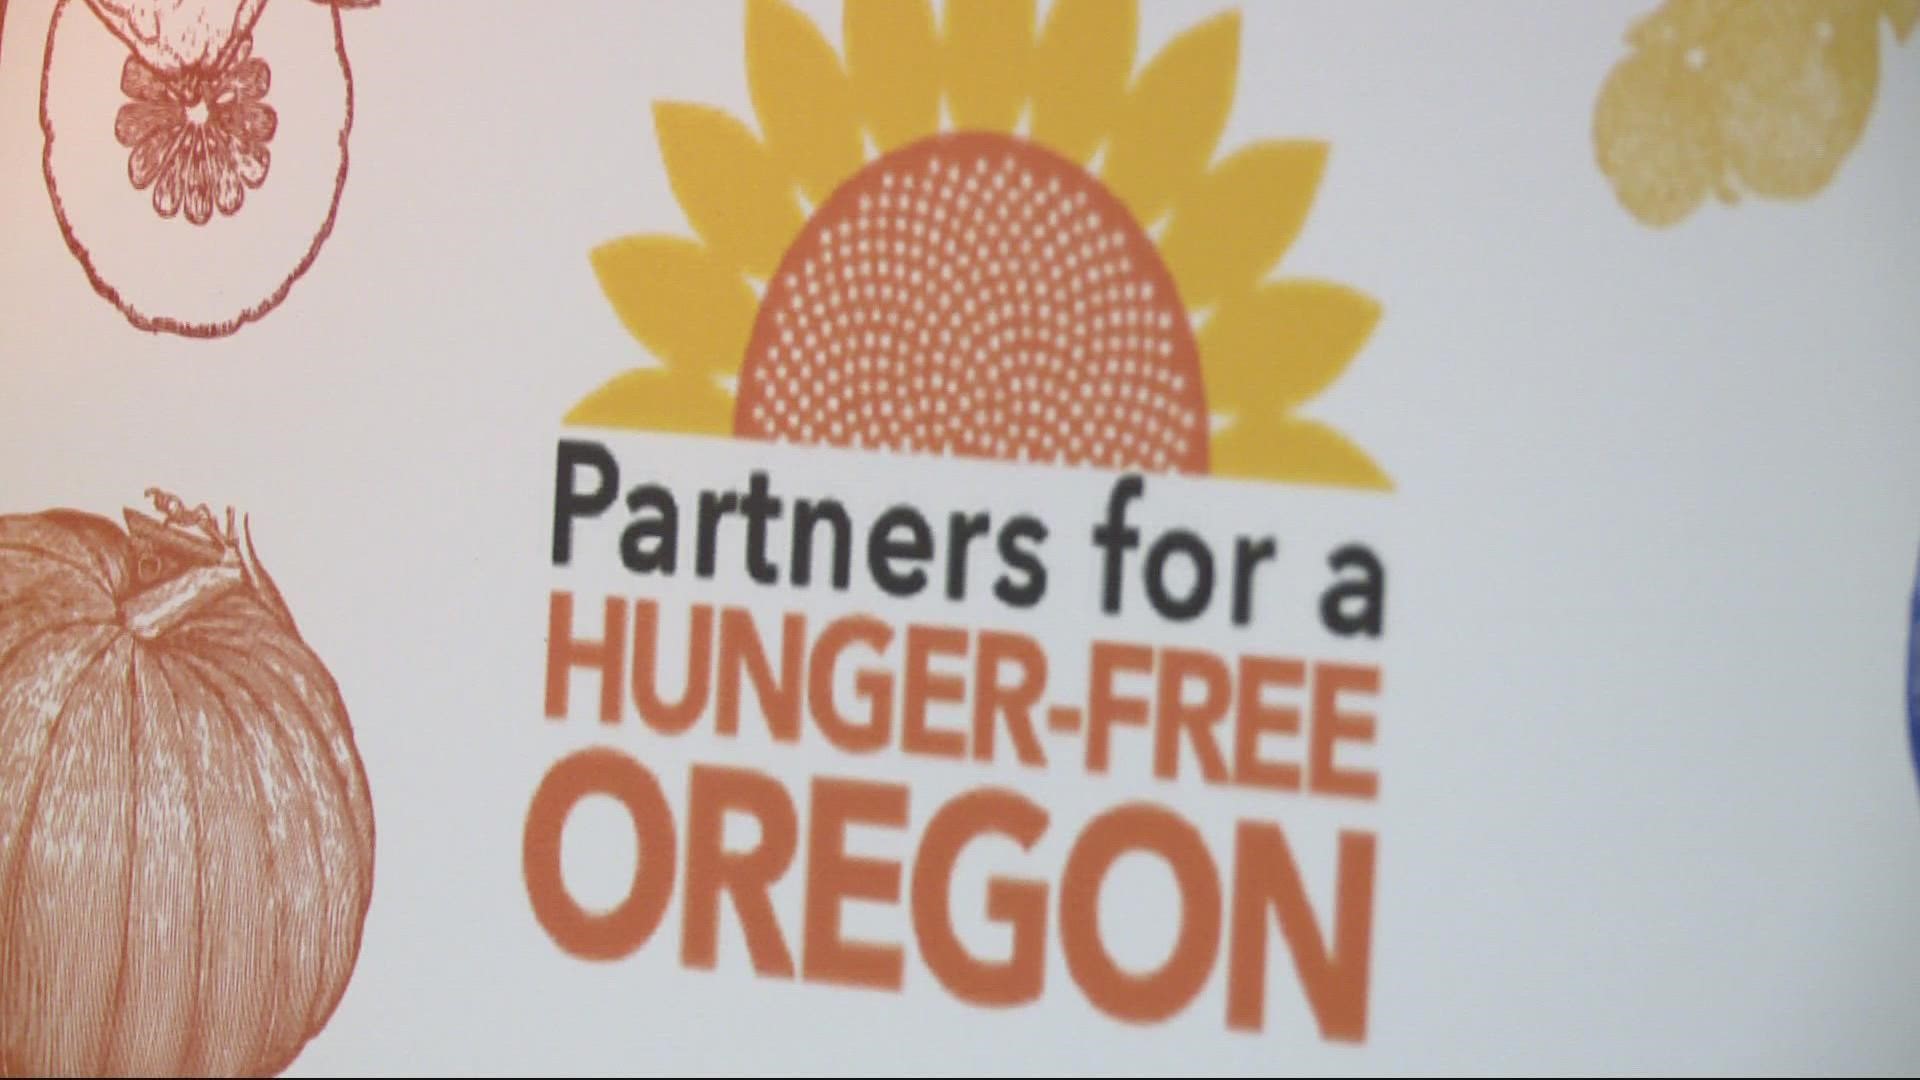 Food for all Oregonians held a fundraiser Thursday to change Oregon laws on hunger issues.